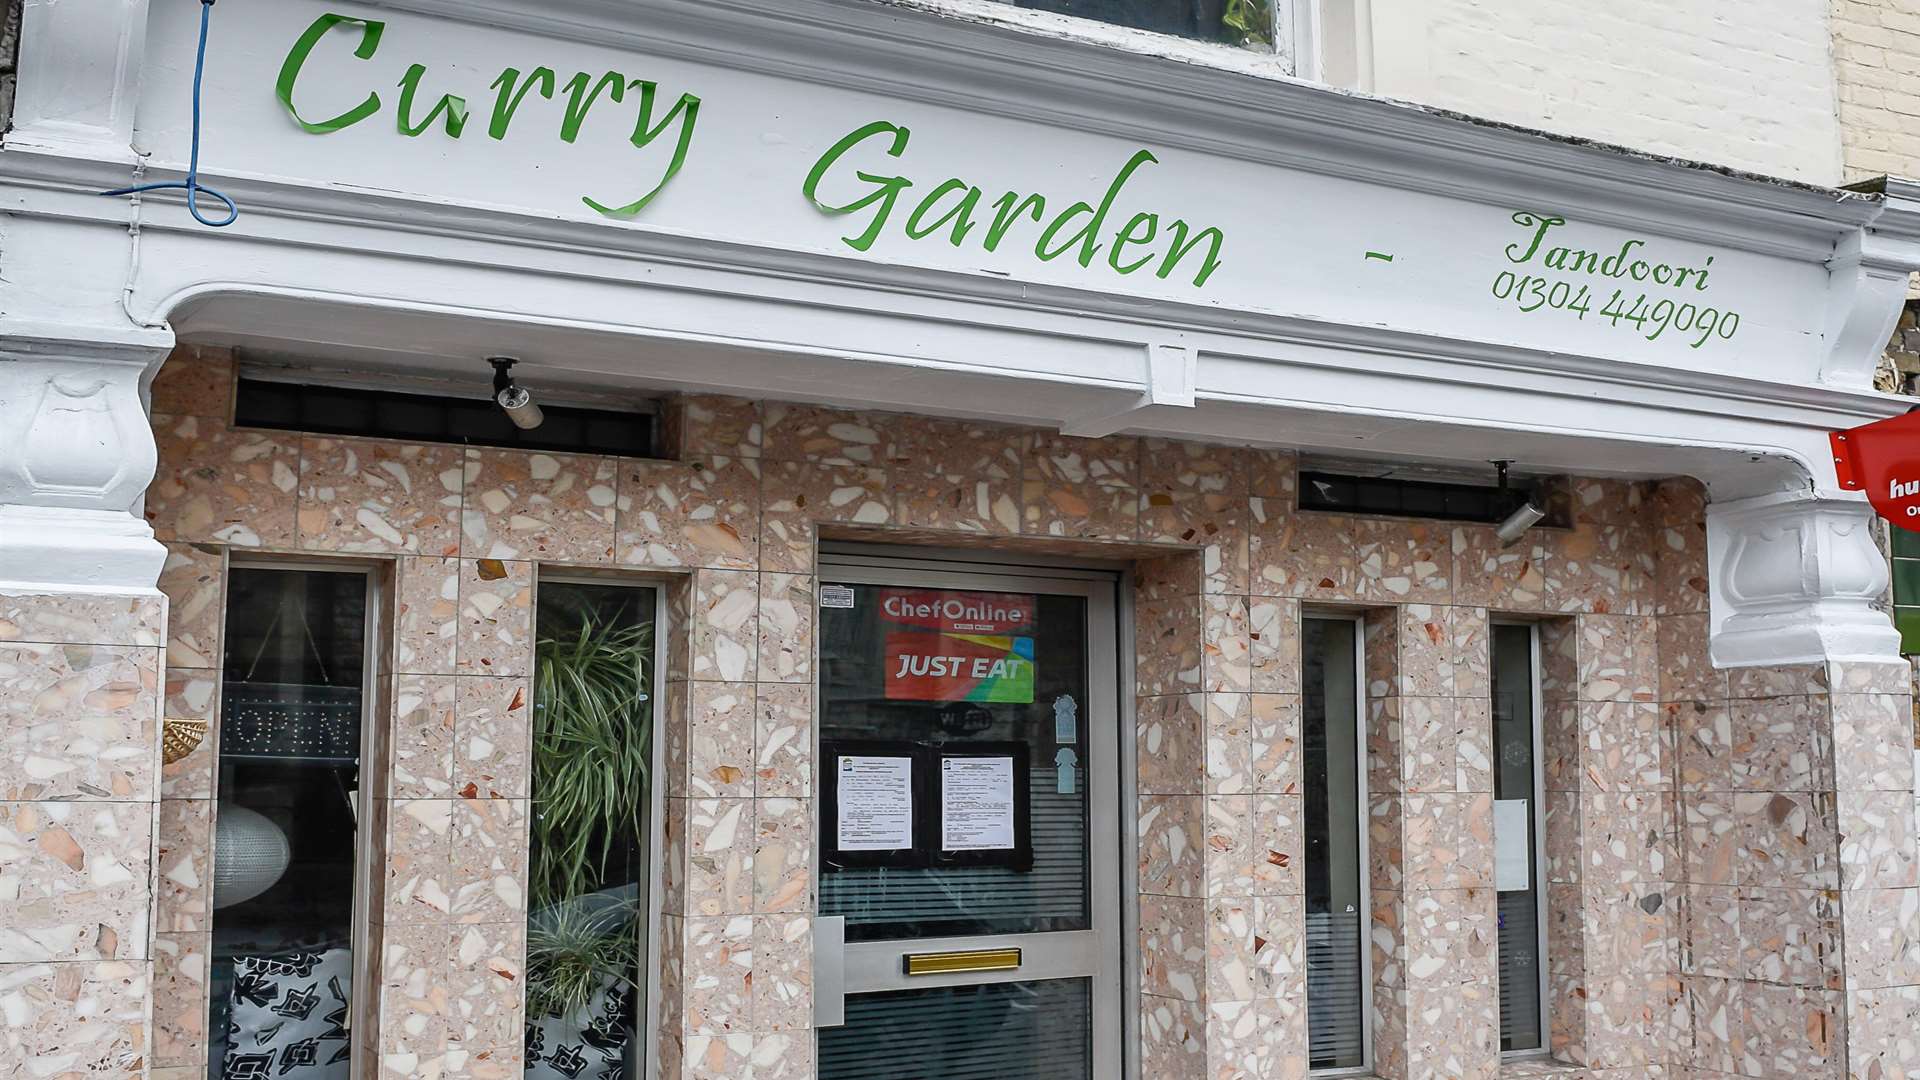 The Curry Garden when the council notice was put up